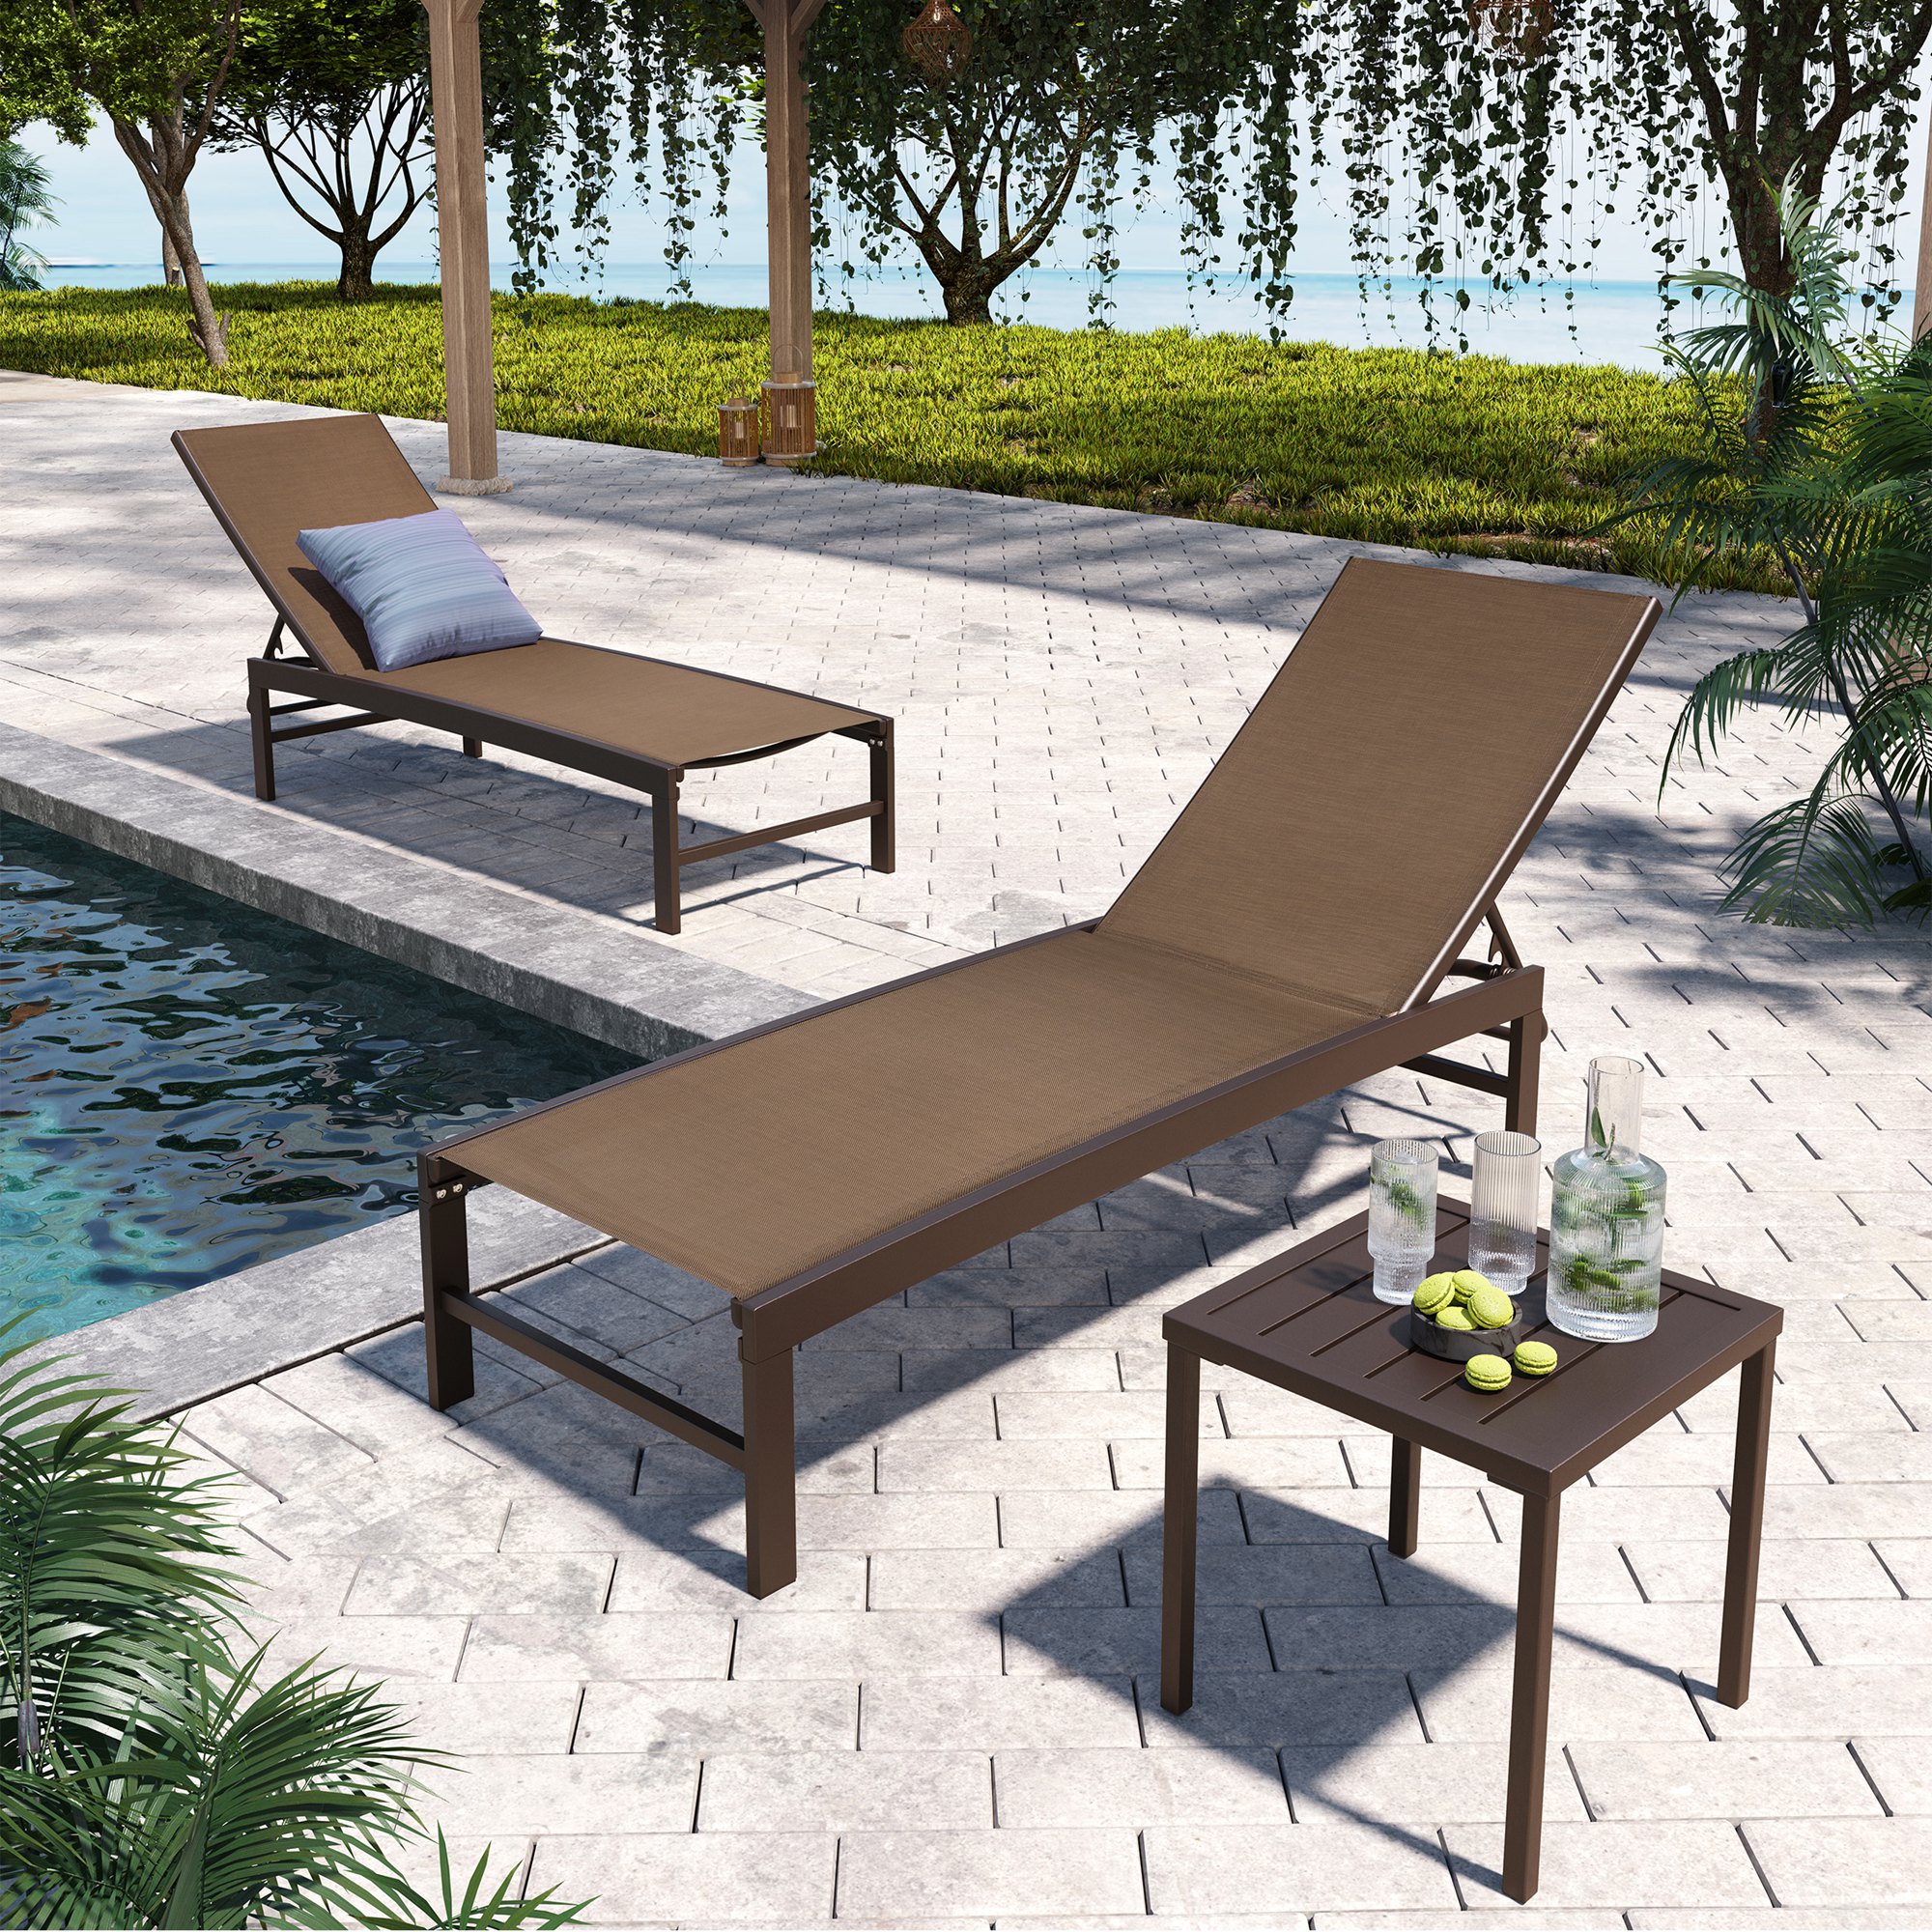 Pellebant Set of 3 Outdoor Chaise Lounge Aluminum Adjustable Patio Chairs With Table,Brown - image 2 of 10